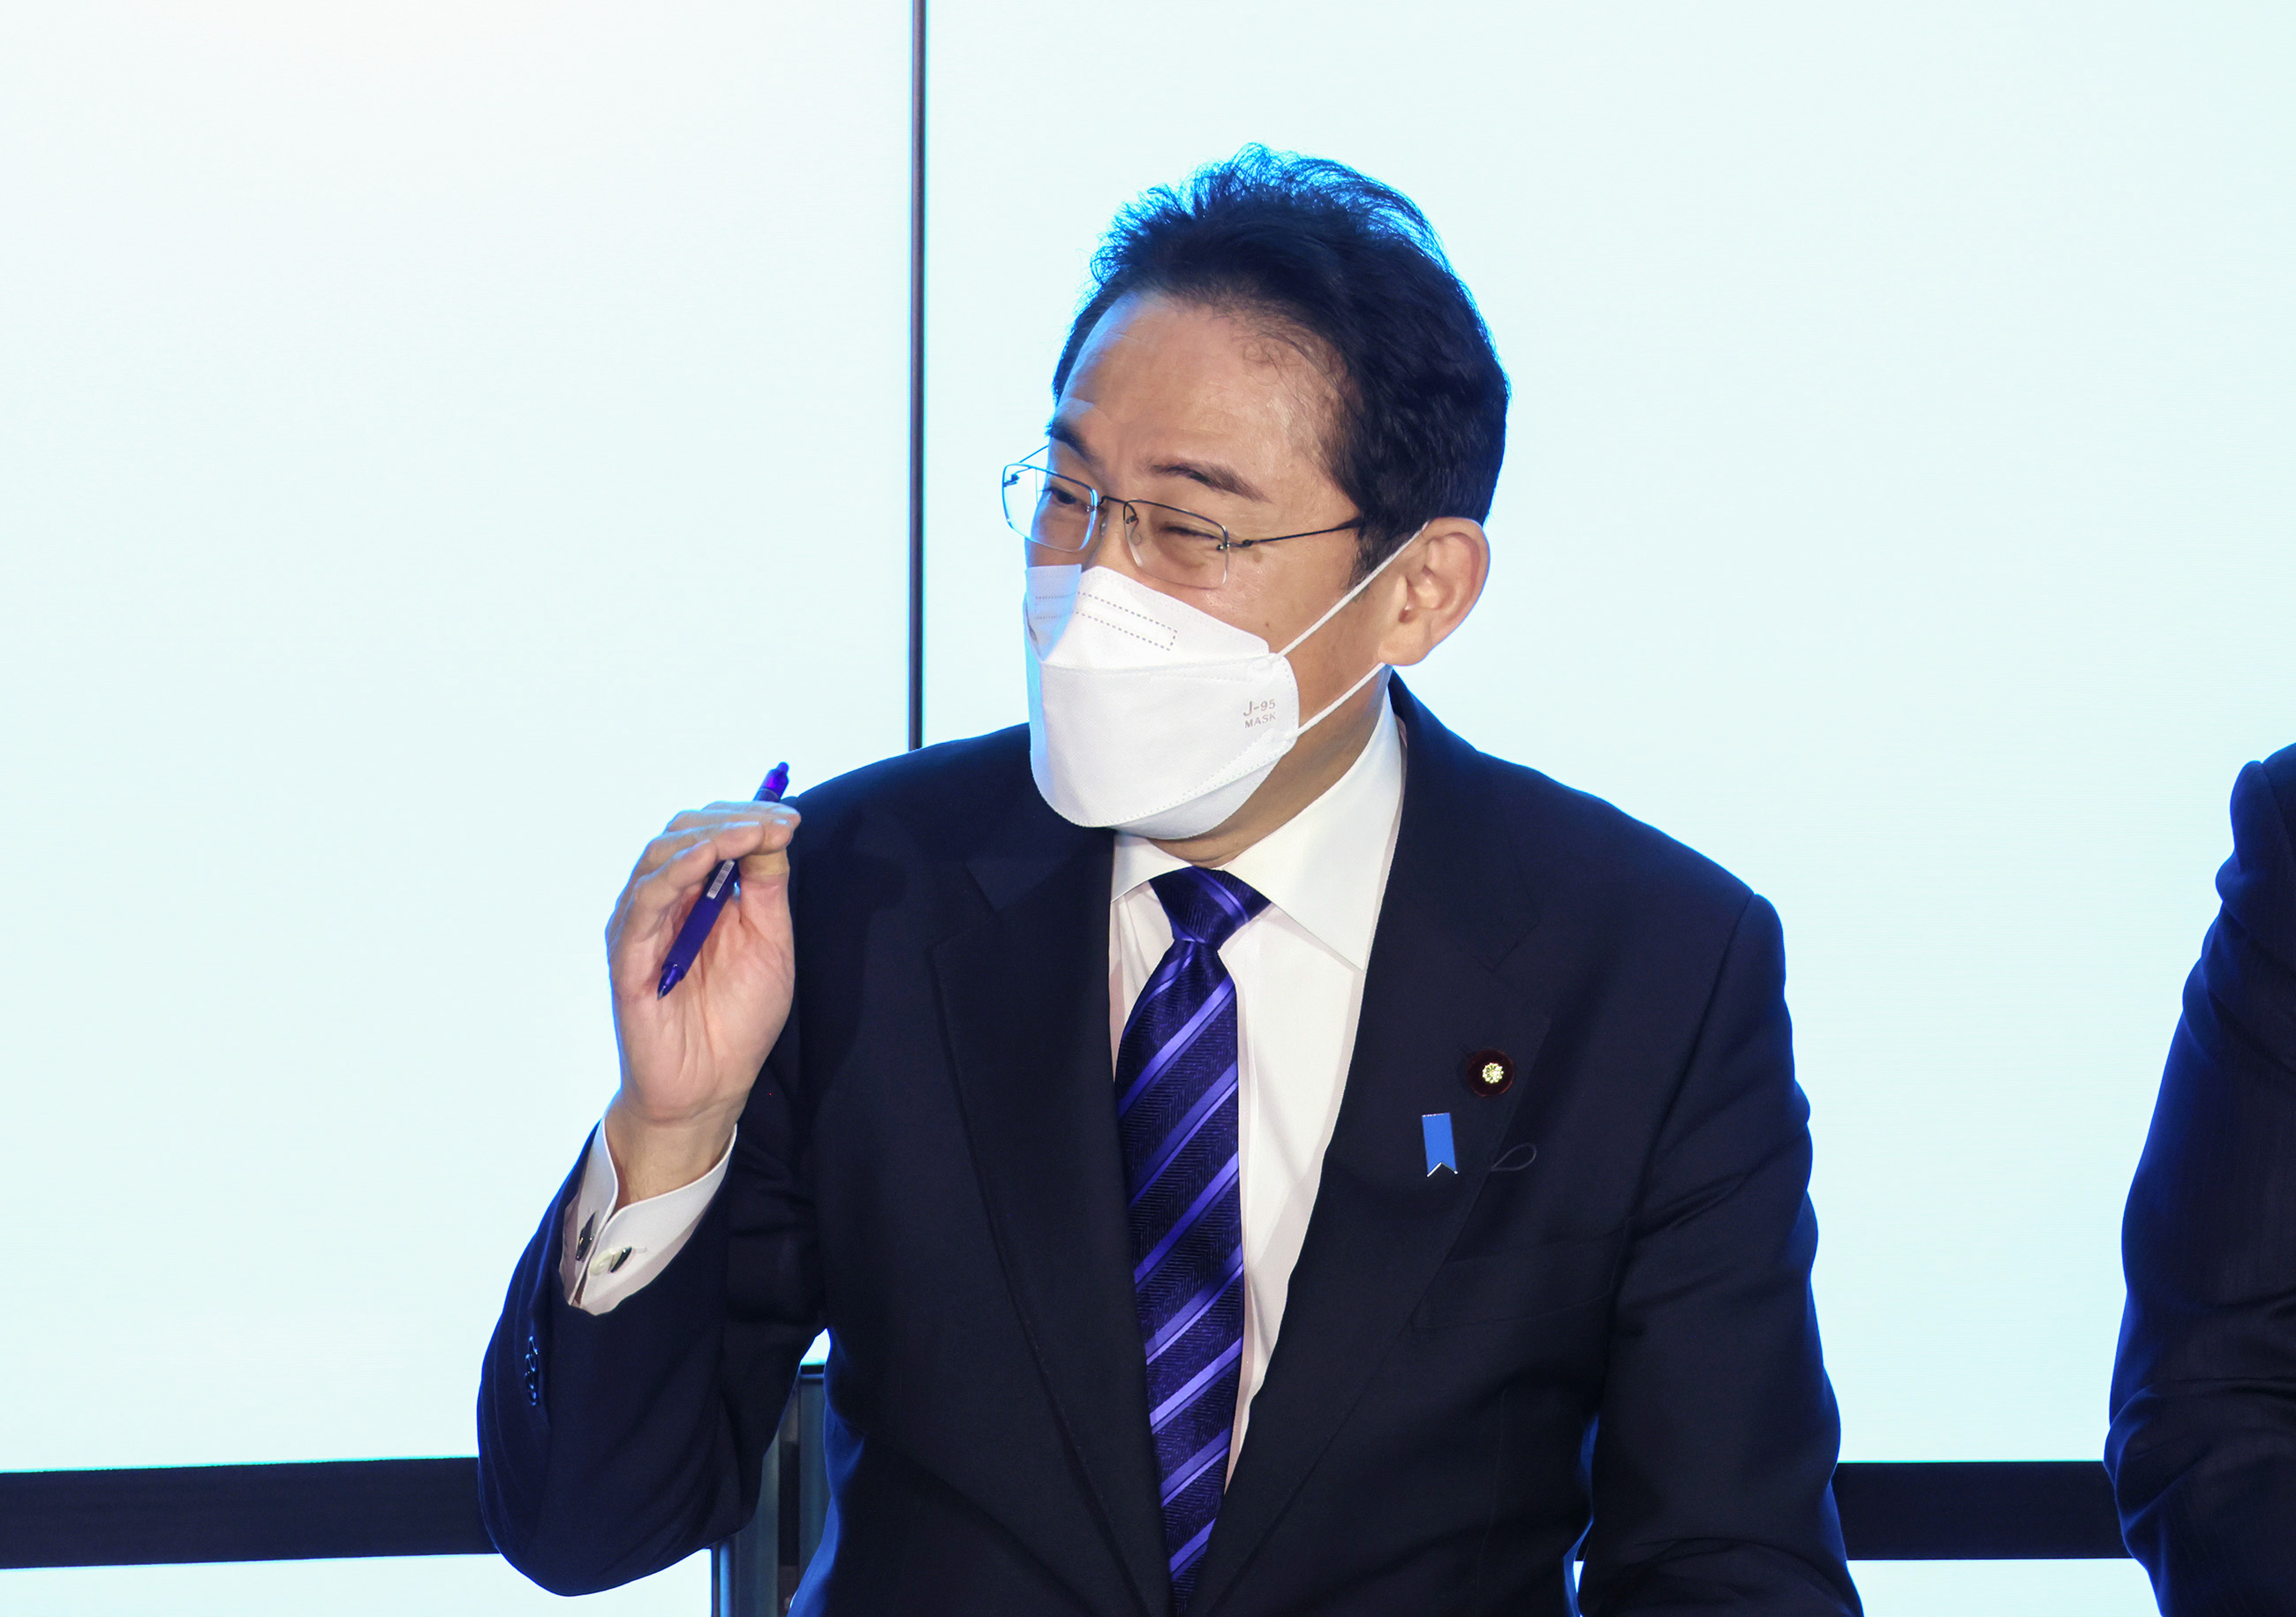 Prime Minister Kishida making remarks in a public dialogue on policies related to children (2)